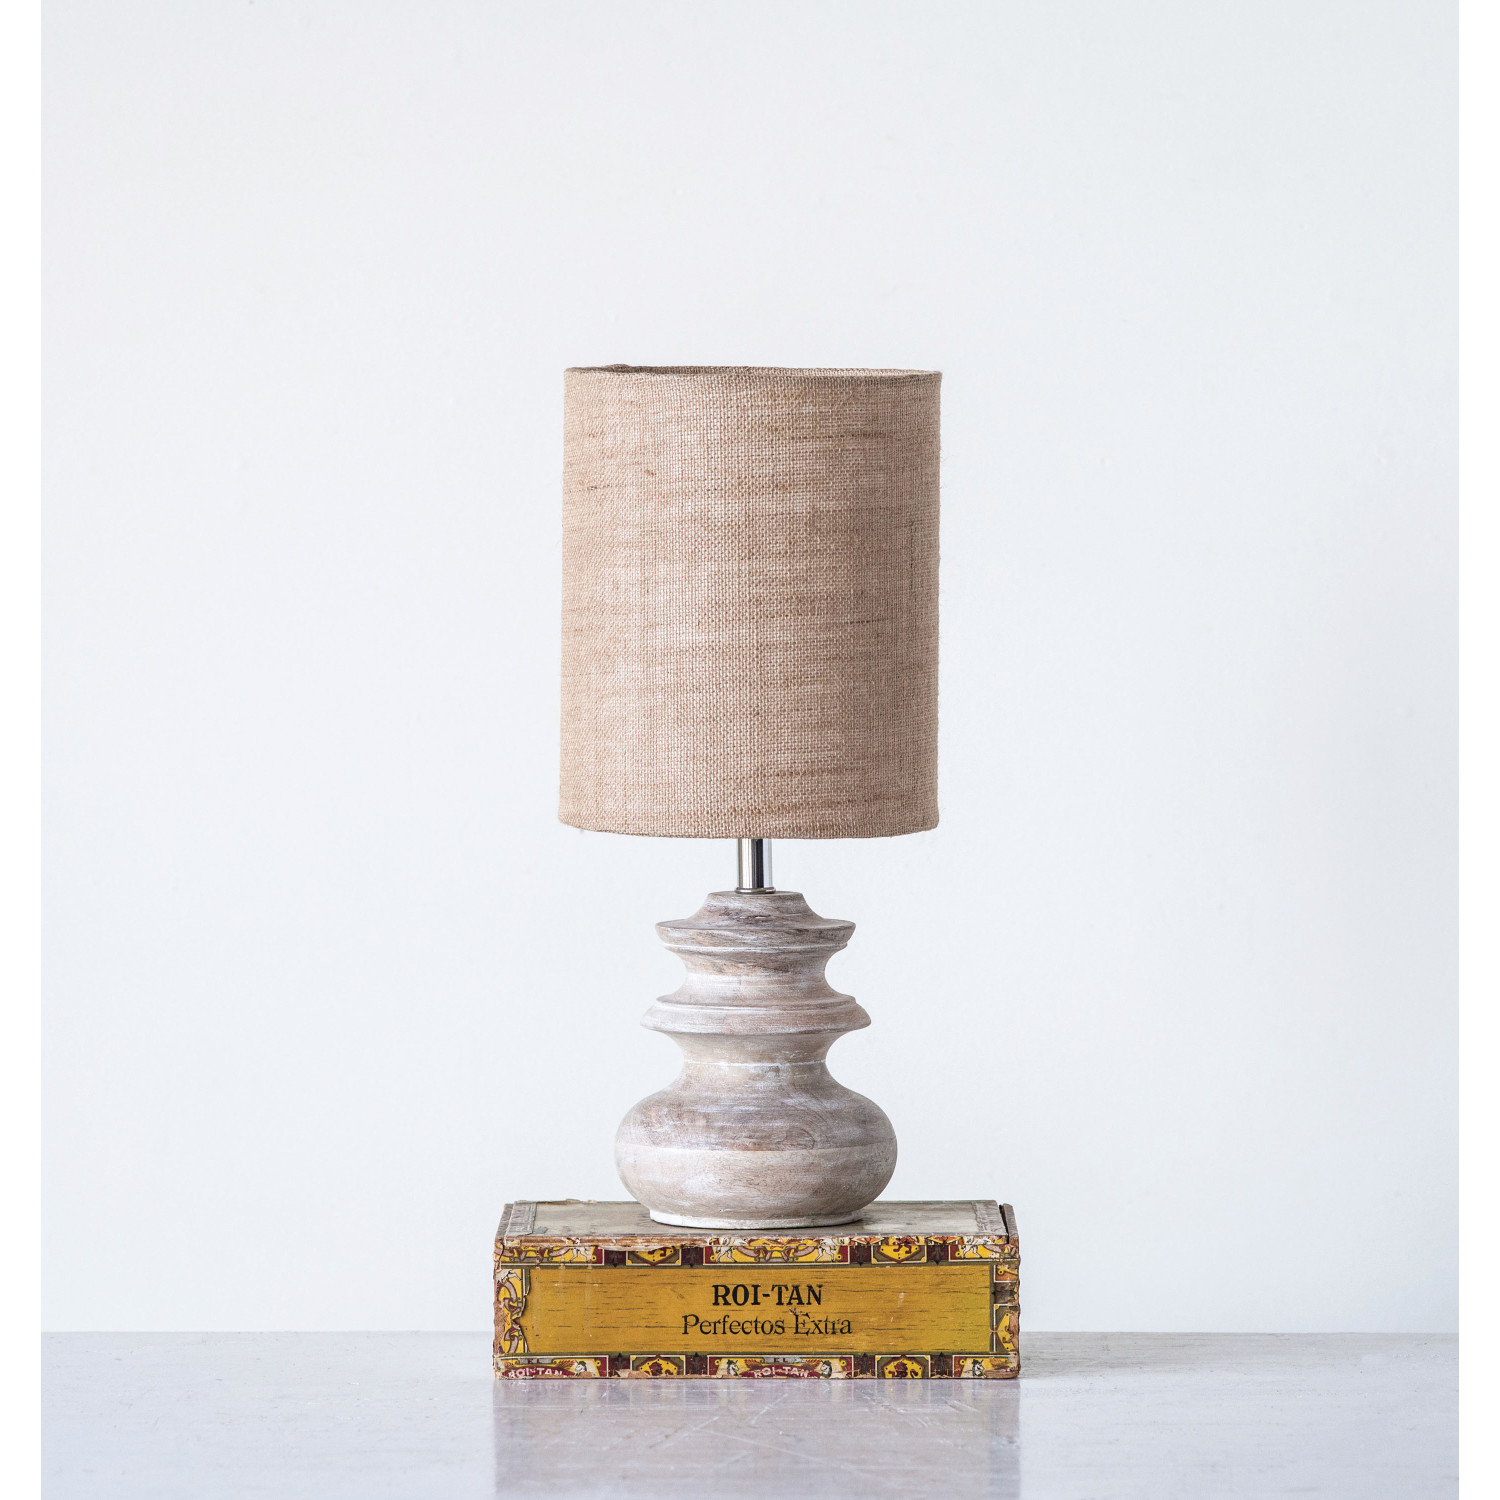 DF0594 by Creative Co-op - Mango Wood Table Lamp with Jute Shade